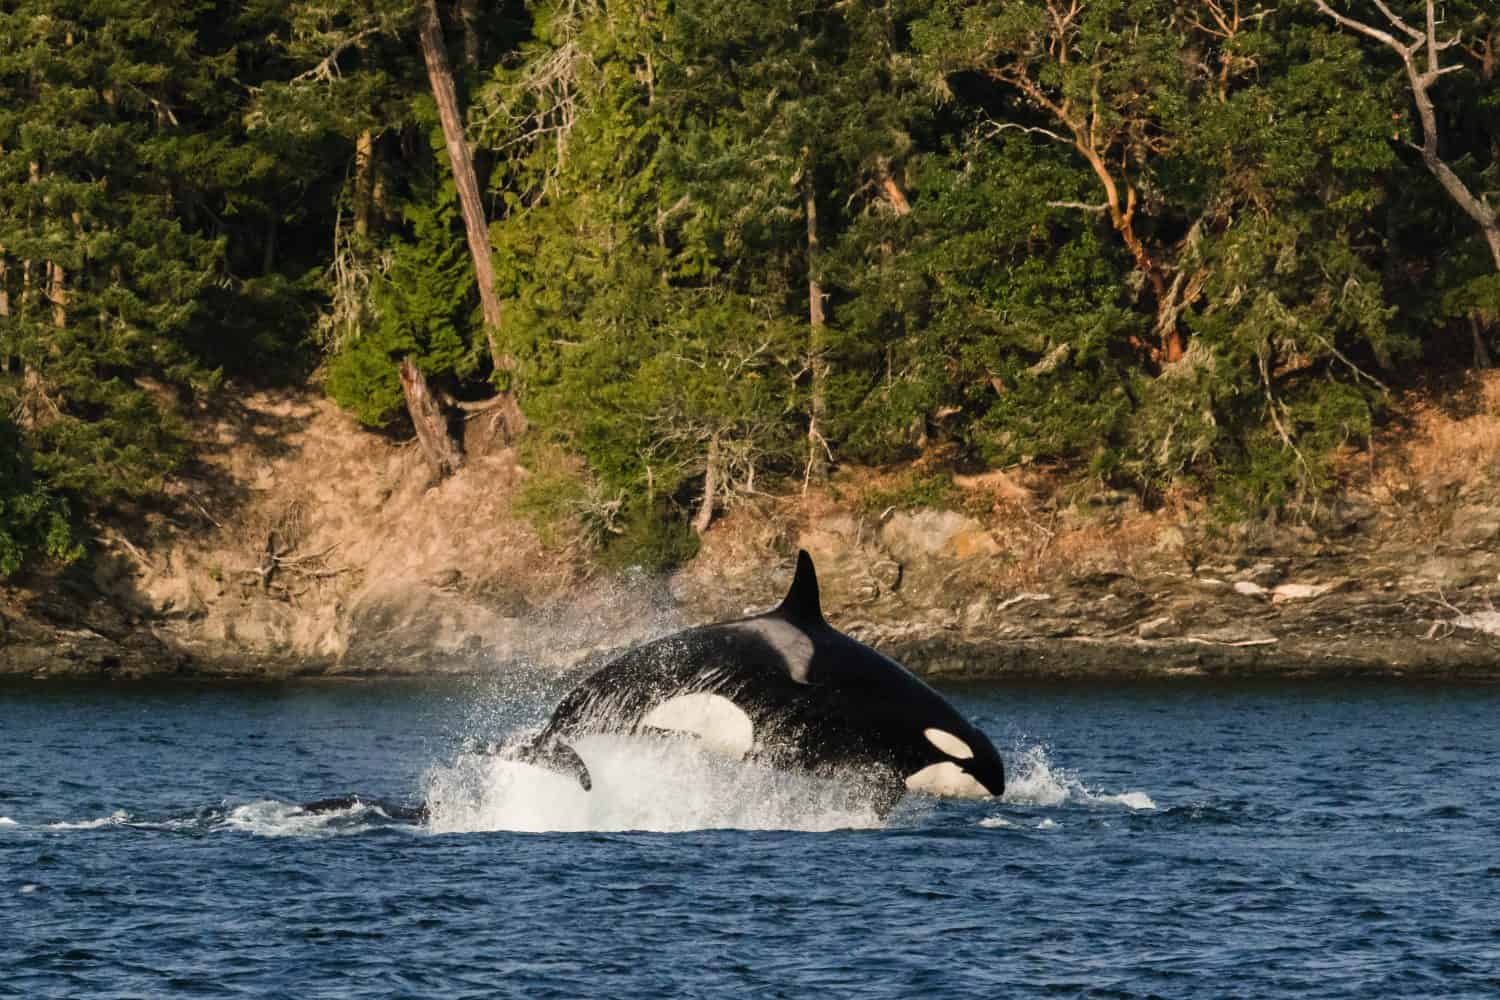 Side view of a transient orca breaching during a sea lion hunt